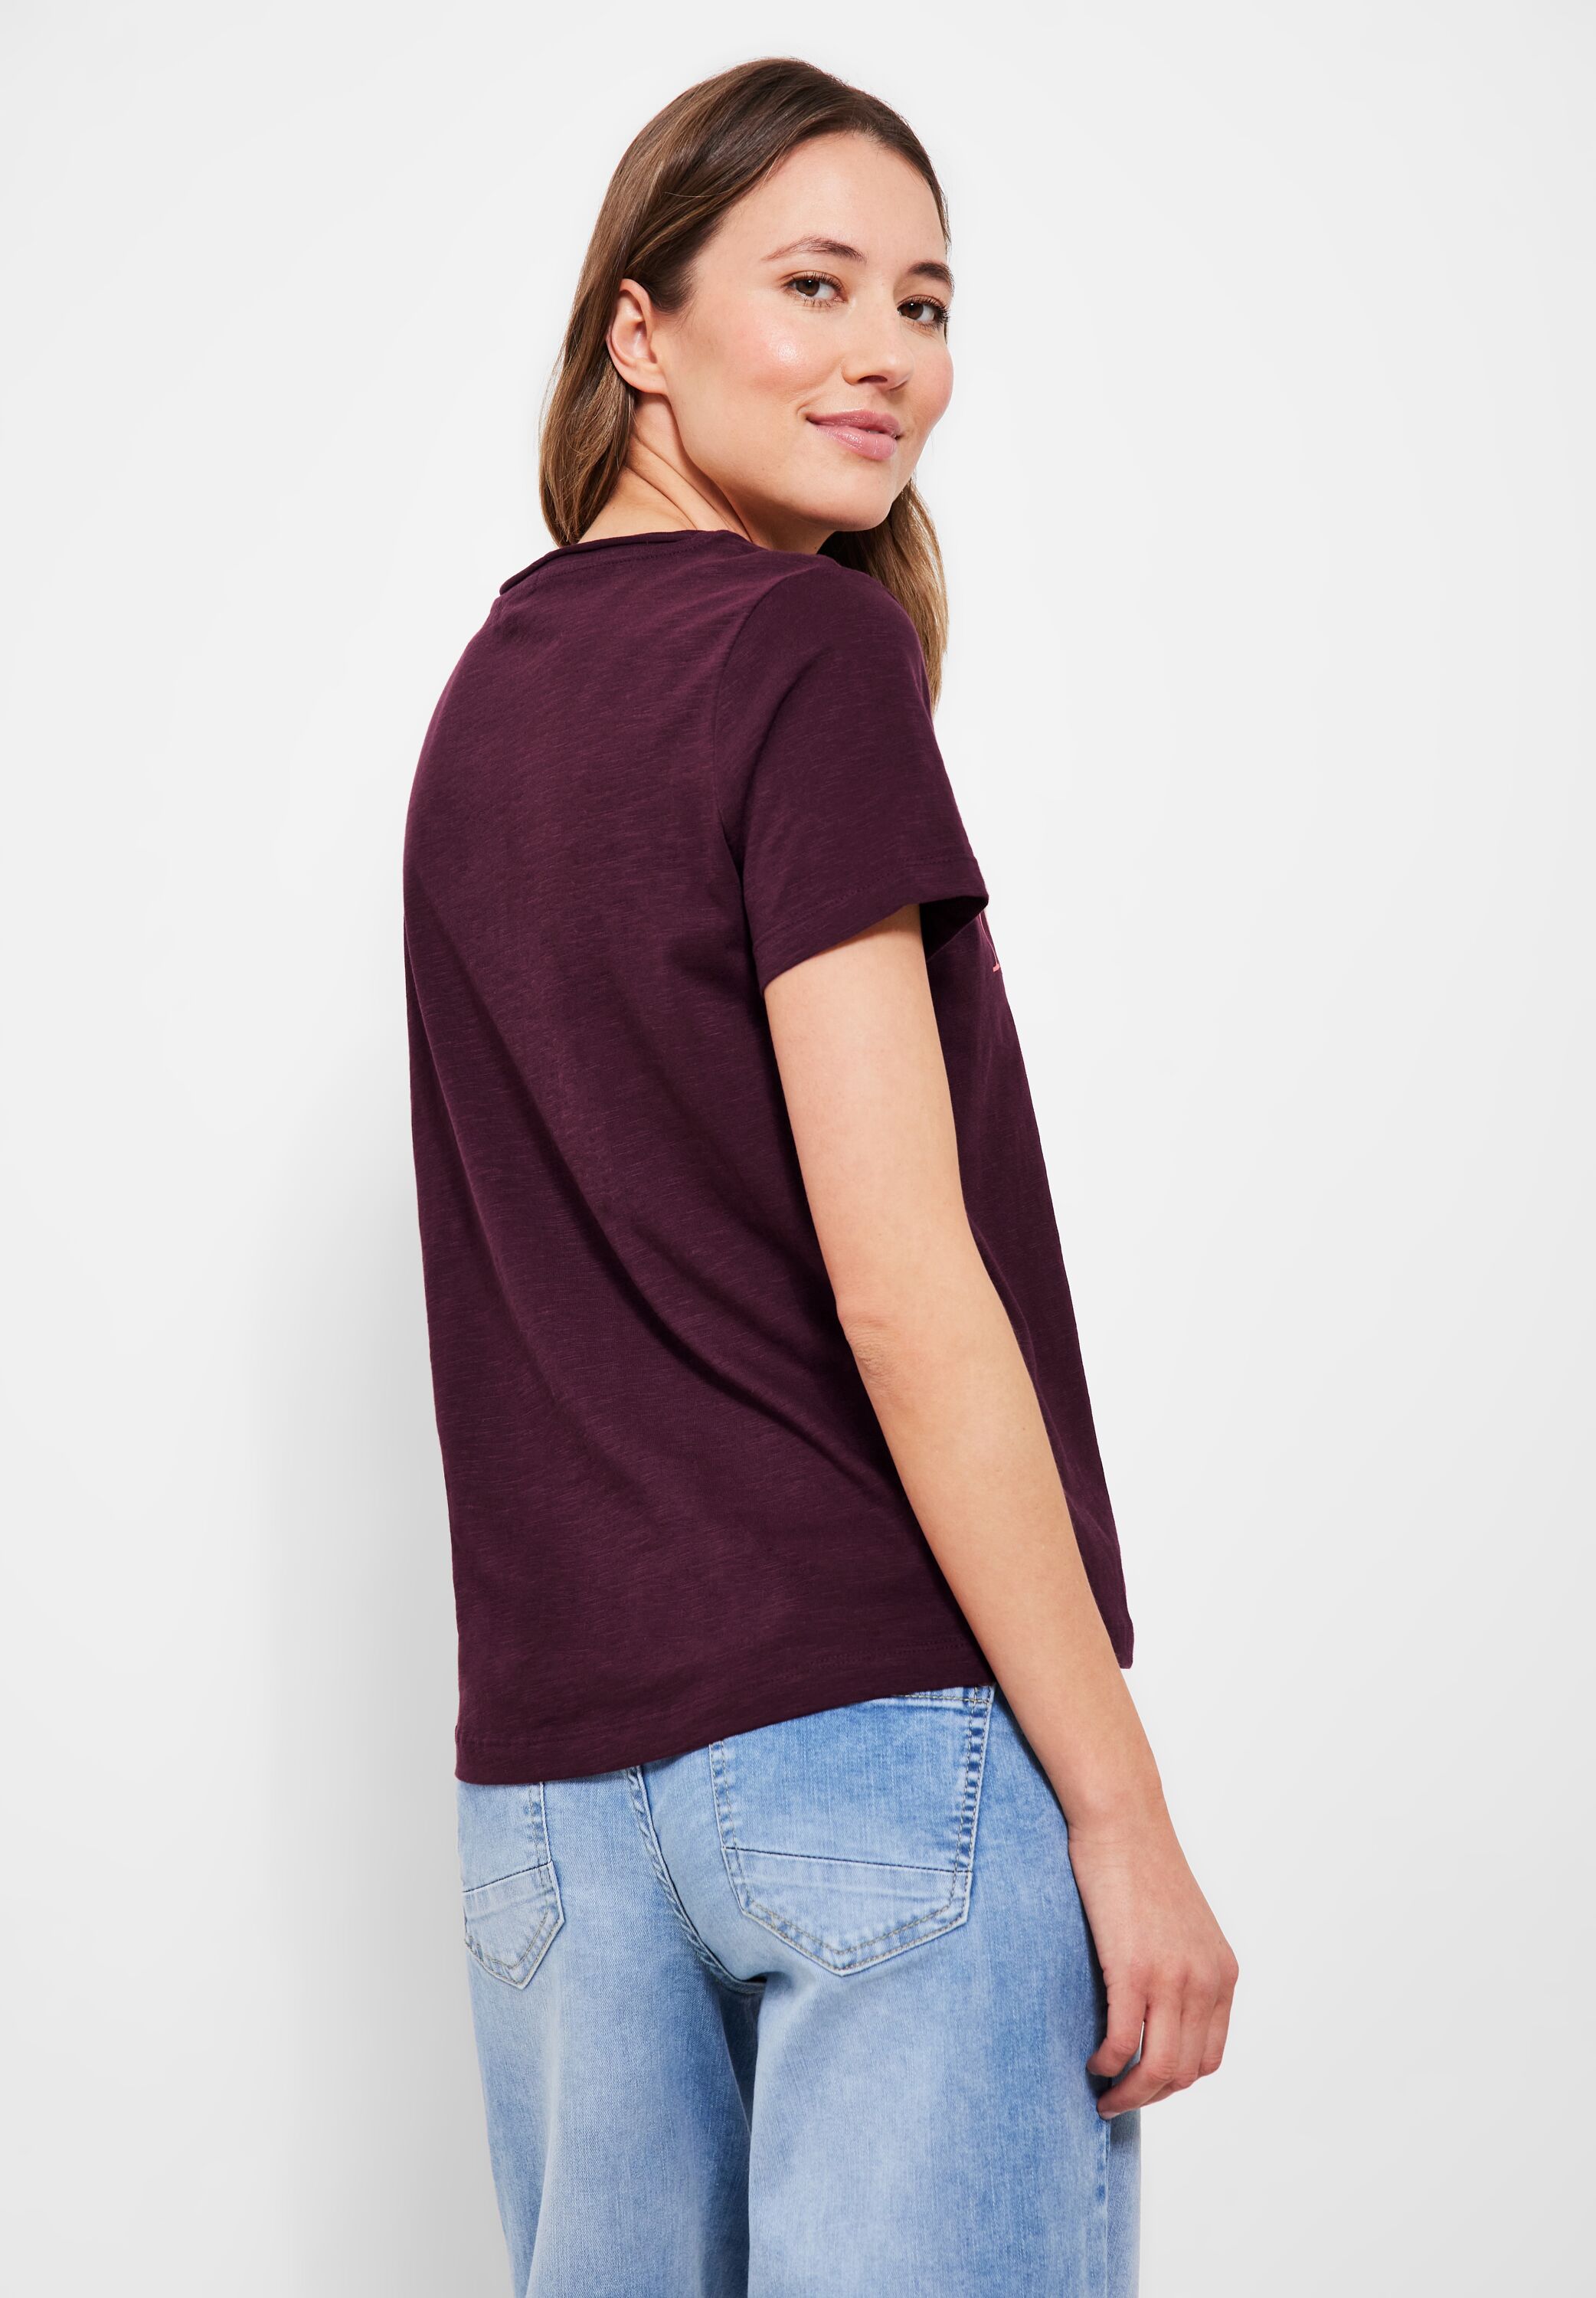 CECIL T-Shirt in Wineberry Red CONCEPT SALE reduziert Mode im - B319637-34918